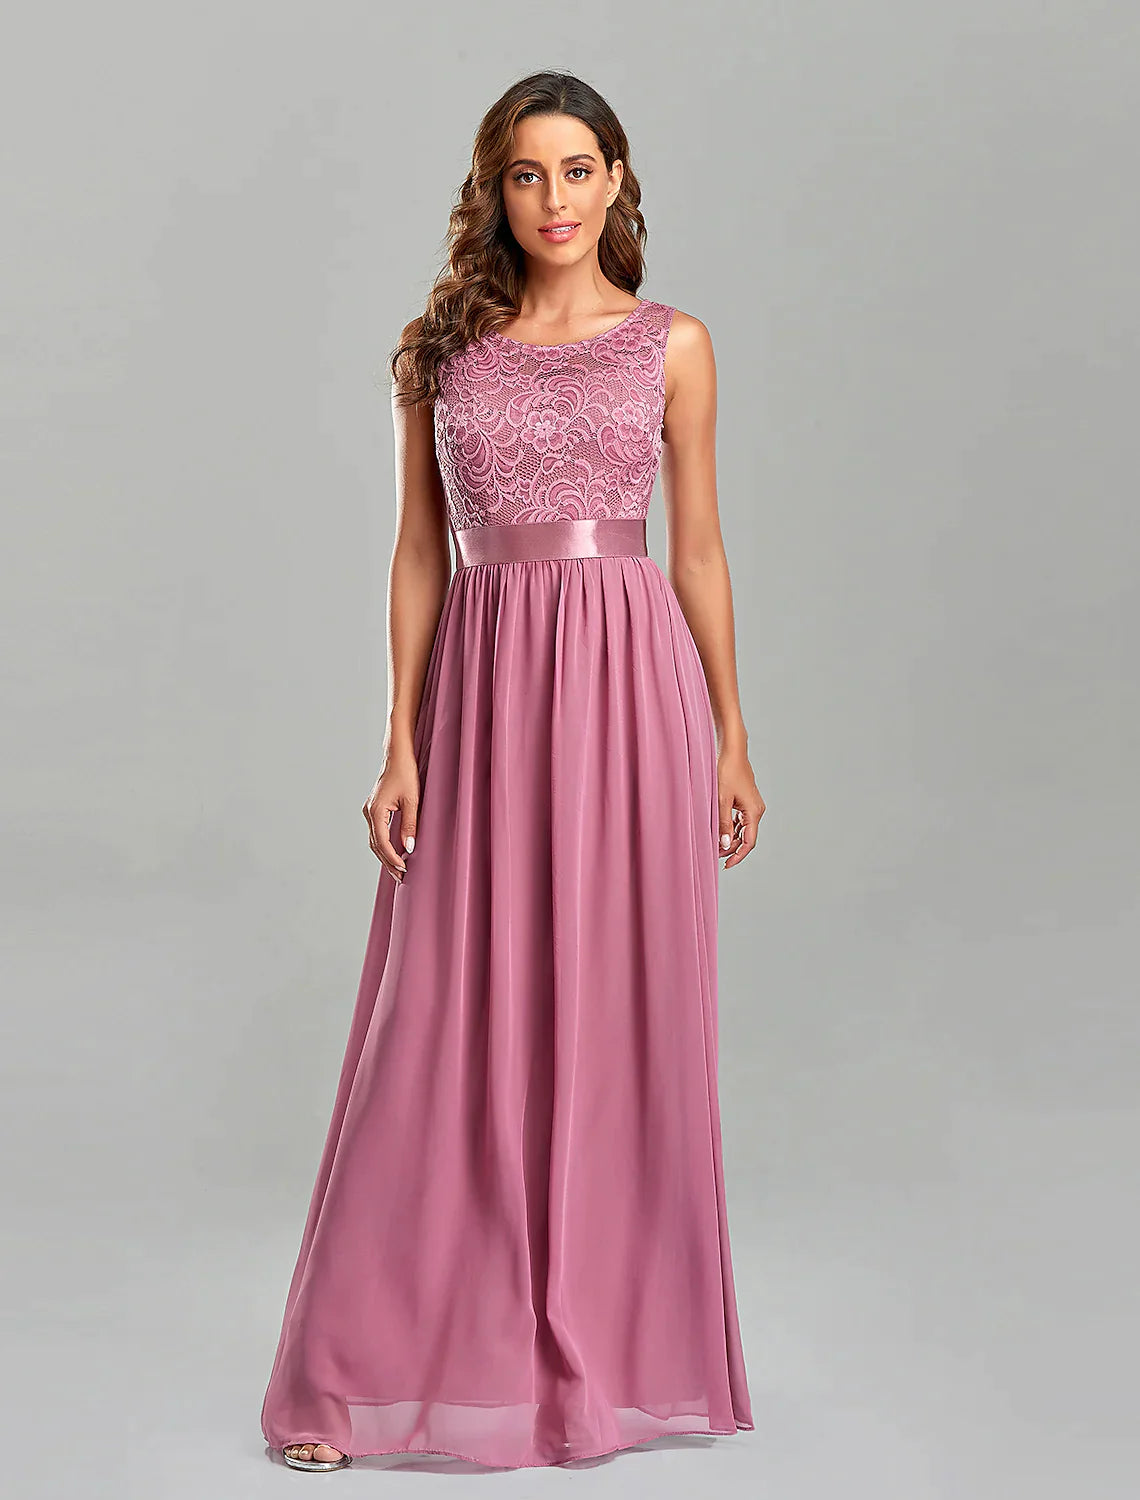 A-Line Evening Gown Dress Party Wear Floor Length Short Sleeve Jewel Neck Chiffon with Embroidery